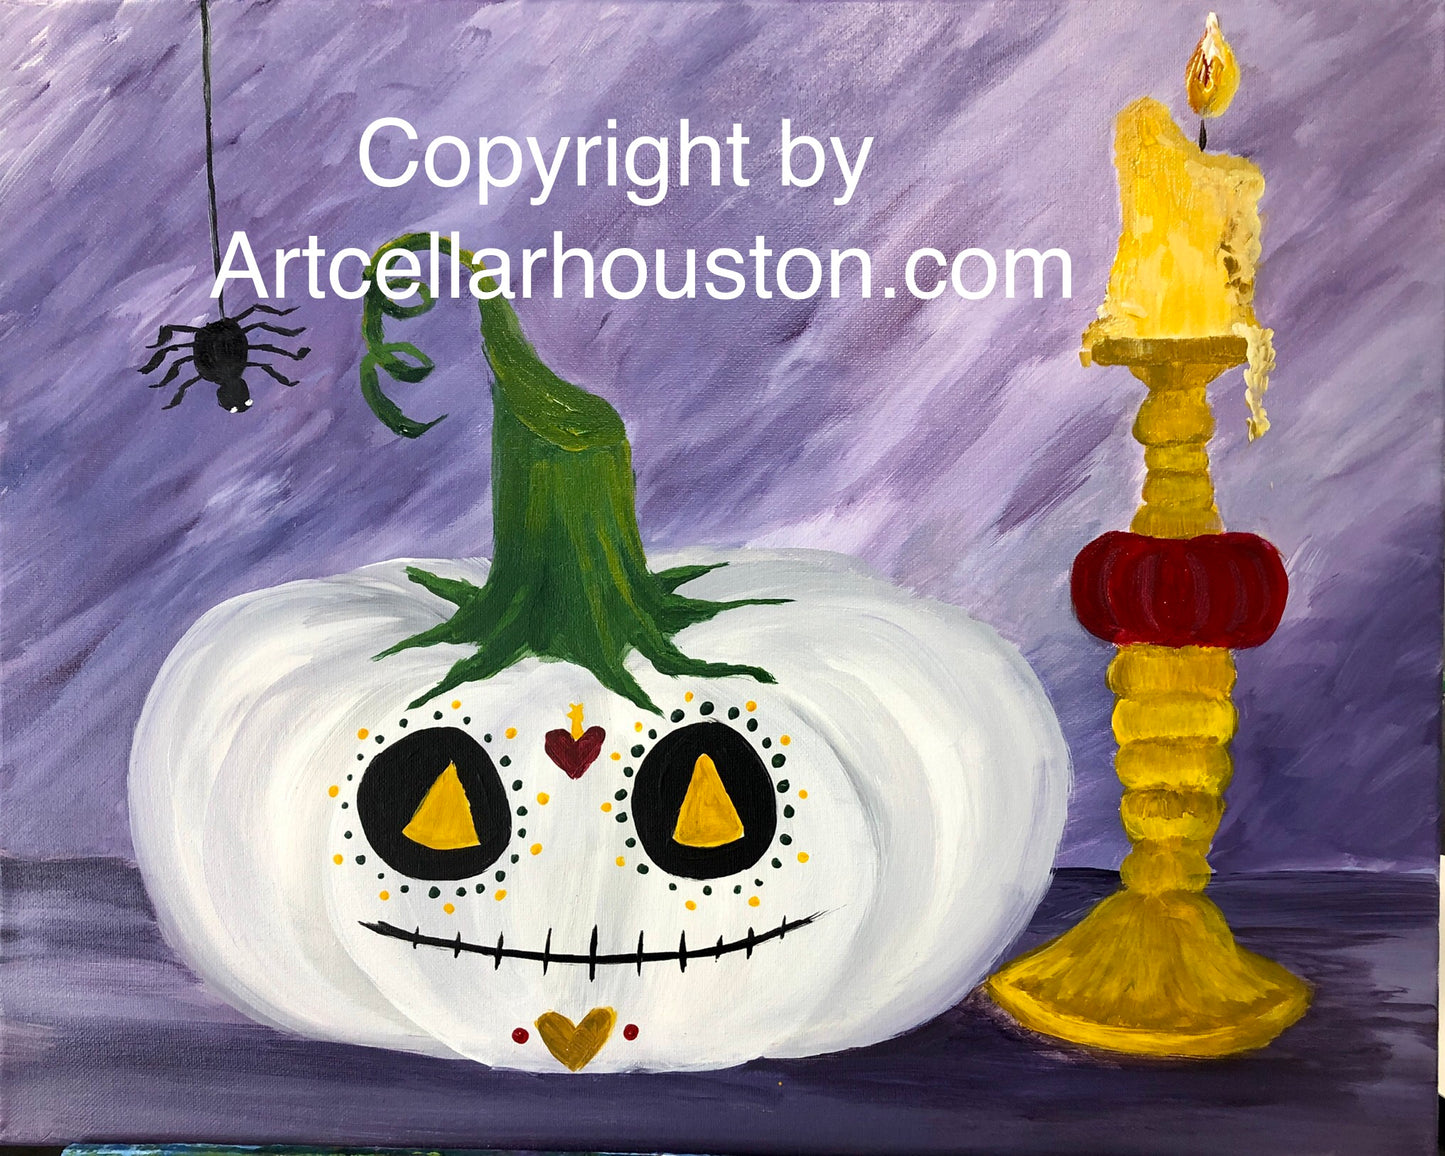 Wed, Oct 21, 4-6p “Pumpkin Spice” Public Houston Family Painting Class